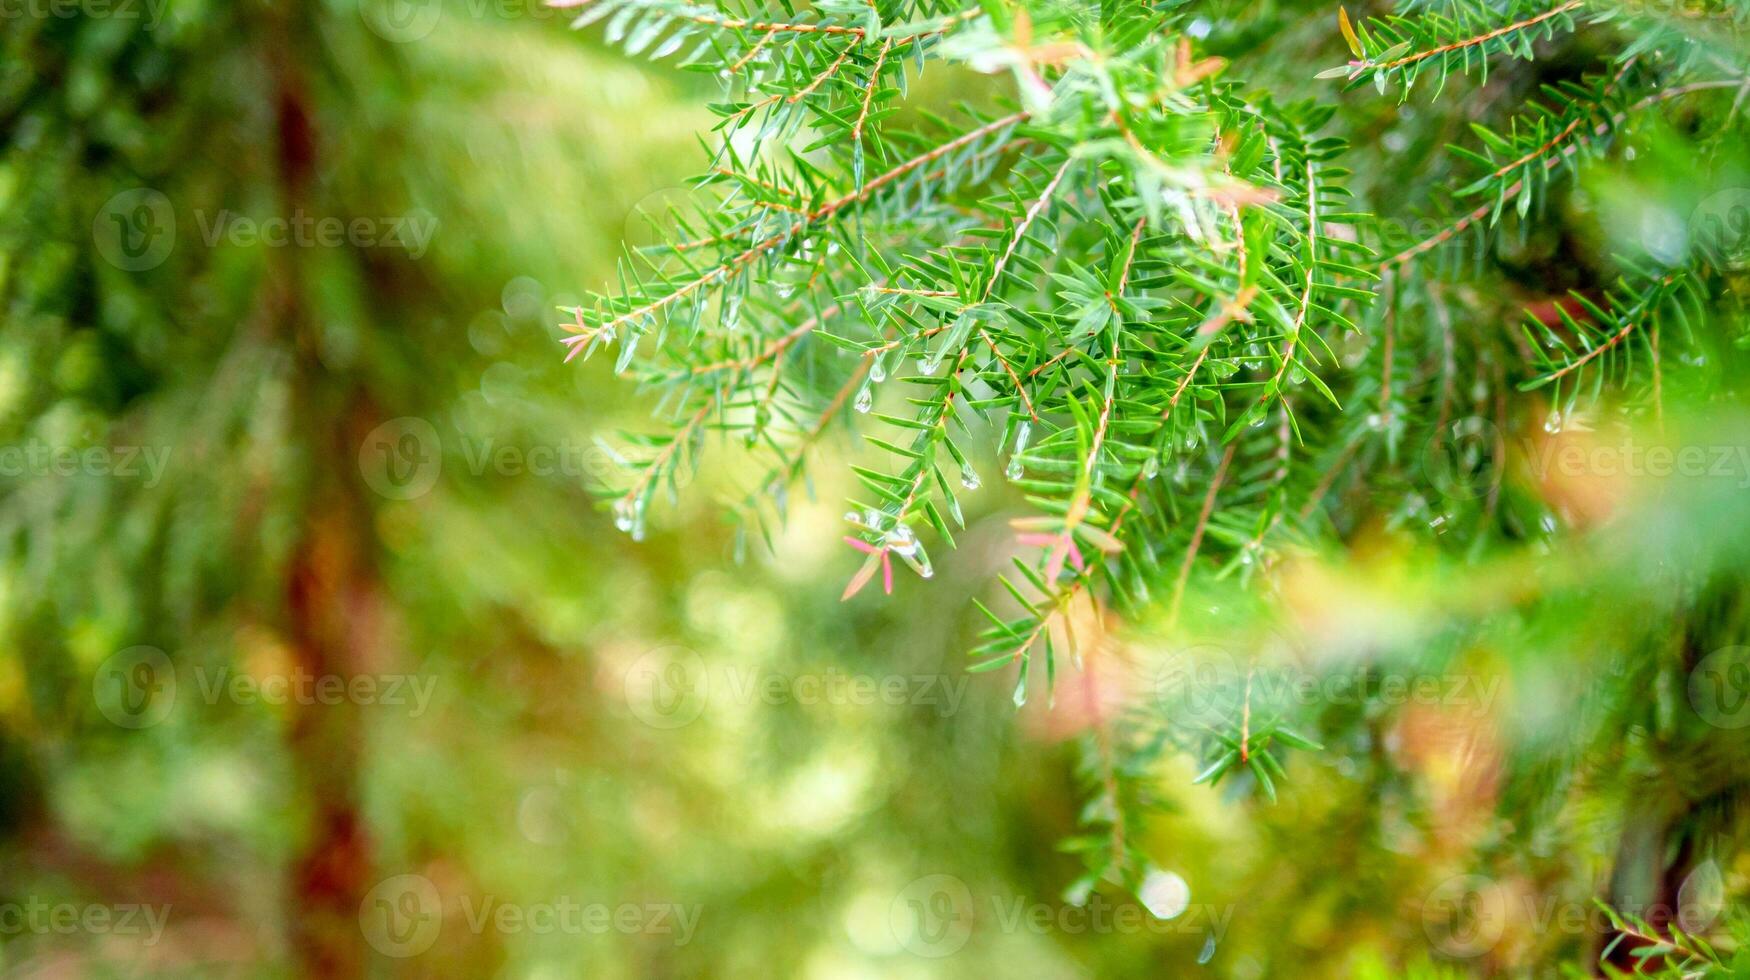 Abstract background of a  green pine tree Christmas natural bokeh, Beautiful abstract natural background. Defocused blurry sunny foliage of green pine trees Christmas background. photo